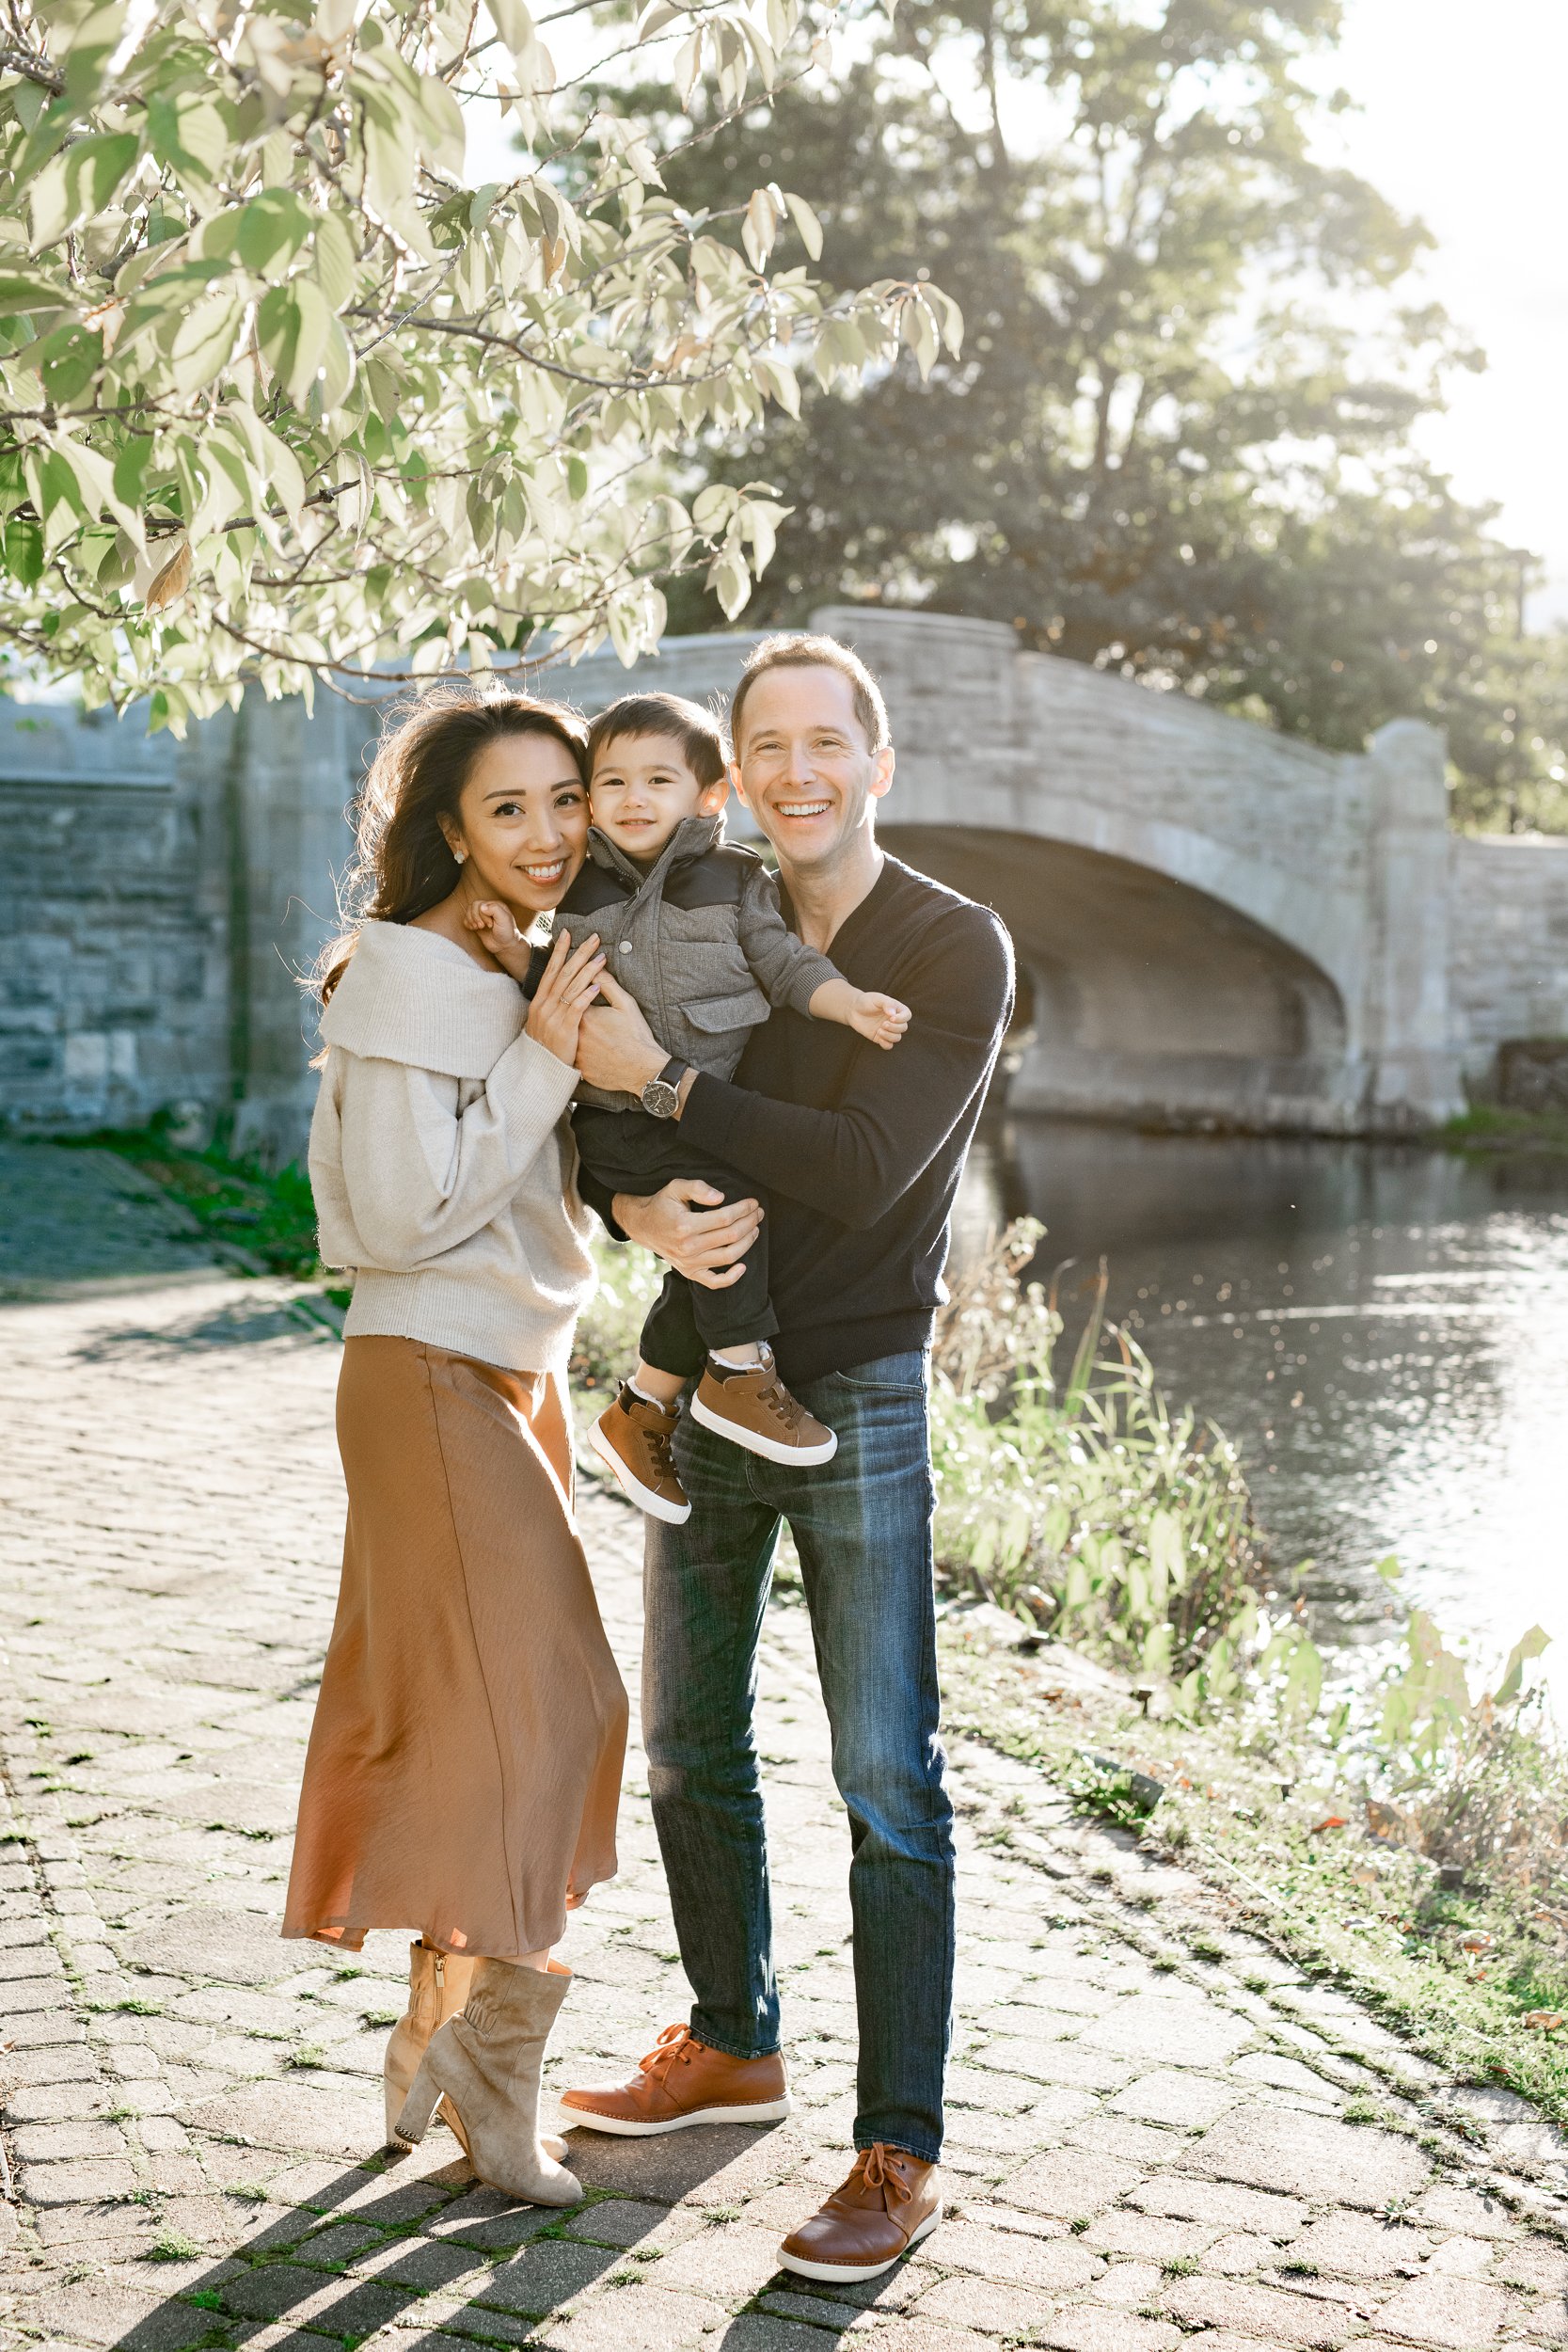  In Verona Park, Nicole Hawkins Photography captures a portrait of a darling family next to a river with golden sunlight highlights. cobblestone path pictures by the river stone bridge young family #nicolehawkinsphotography #nicolehawkinsfamilies #ne